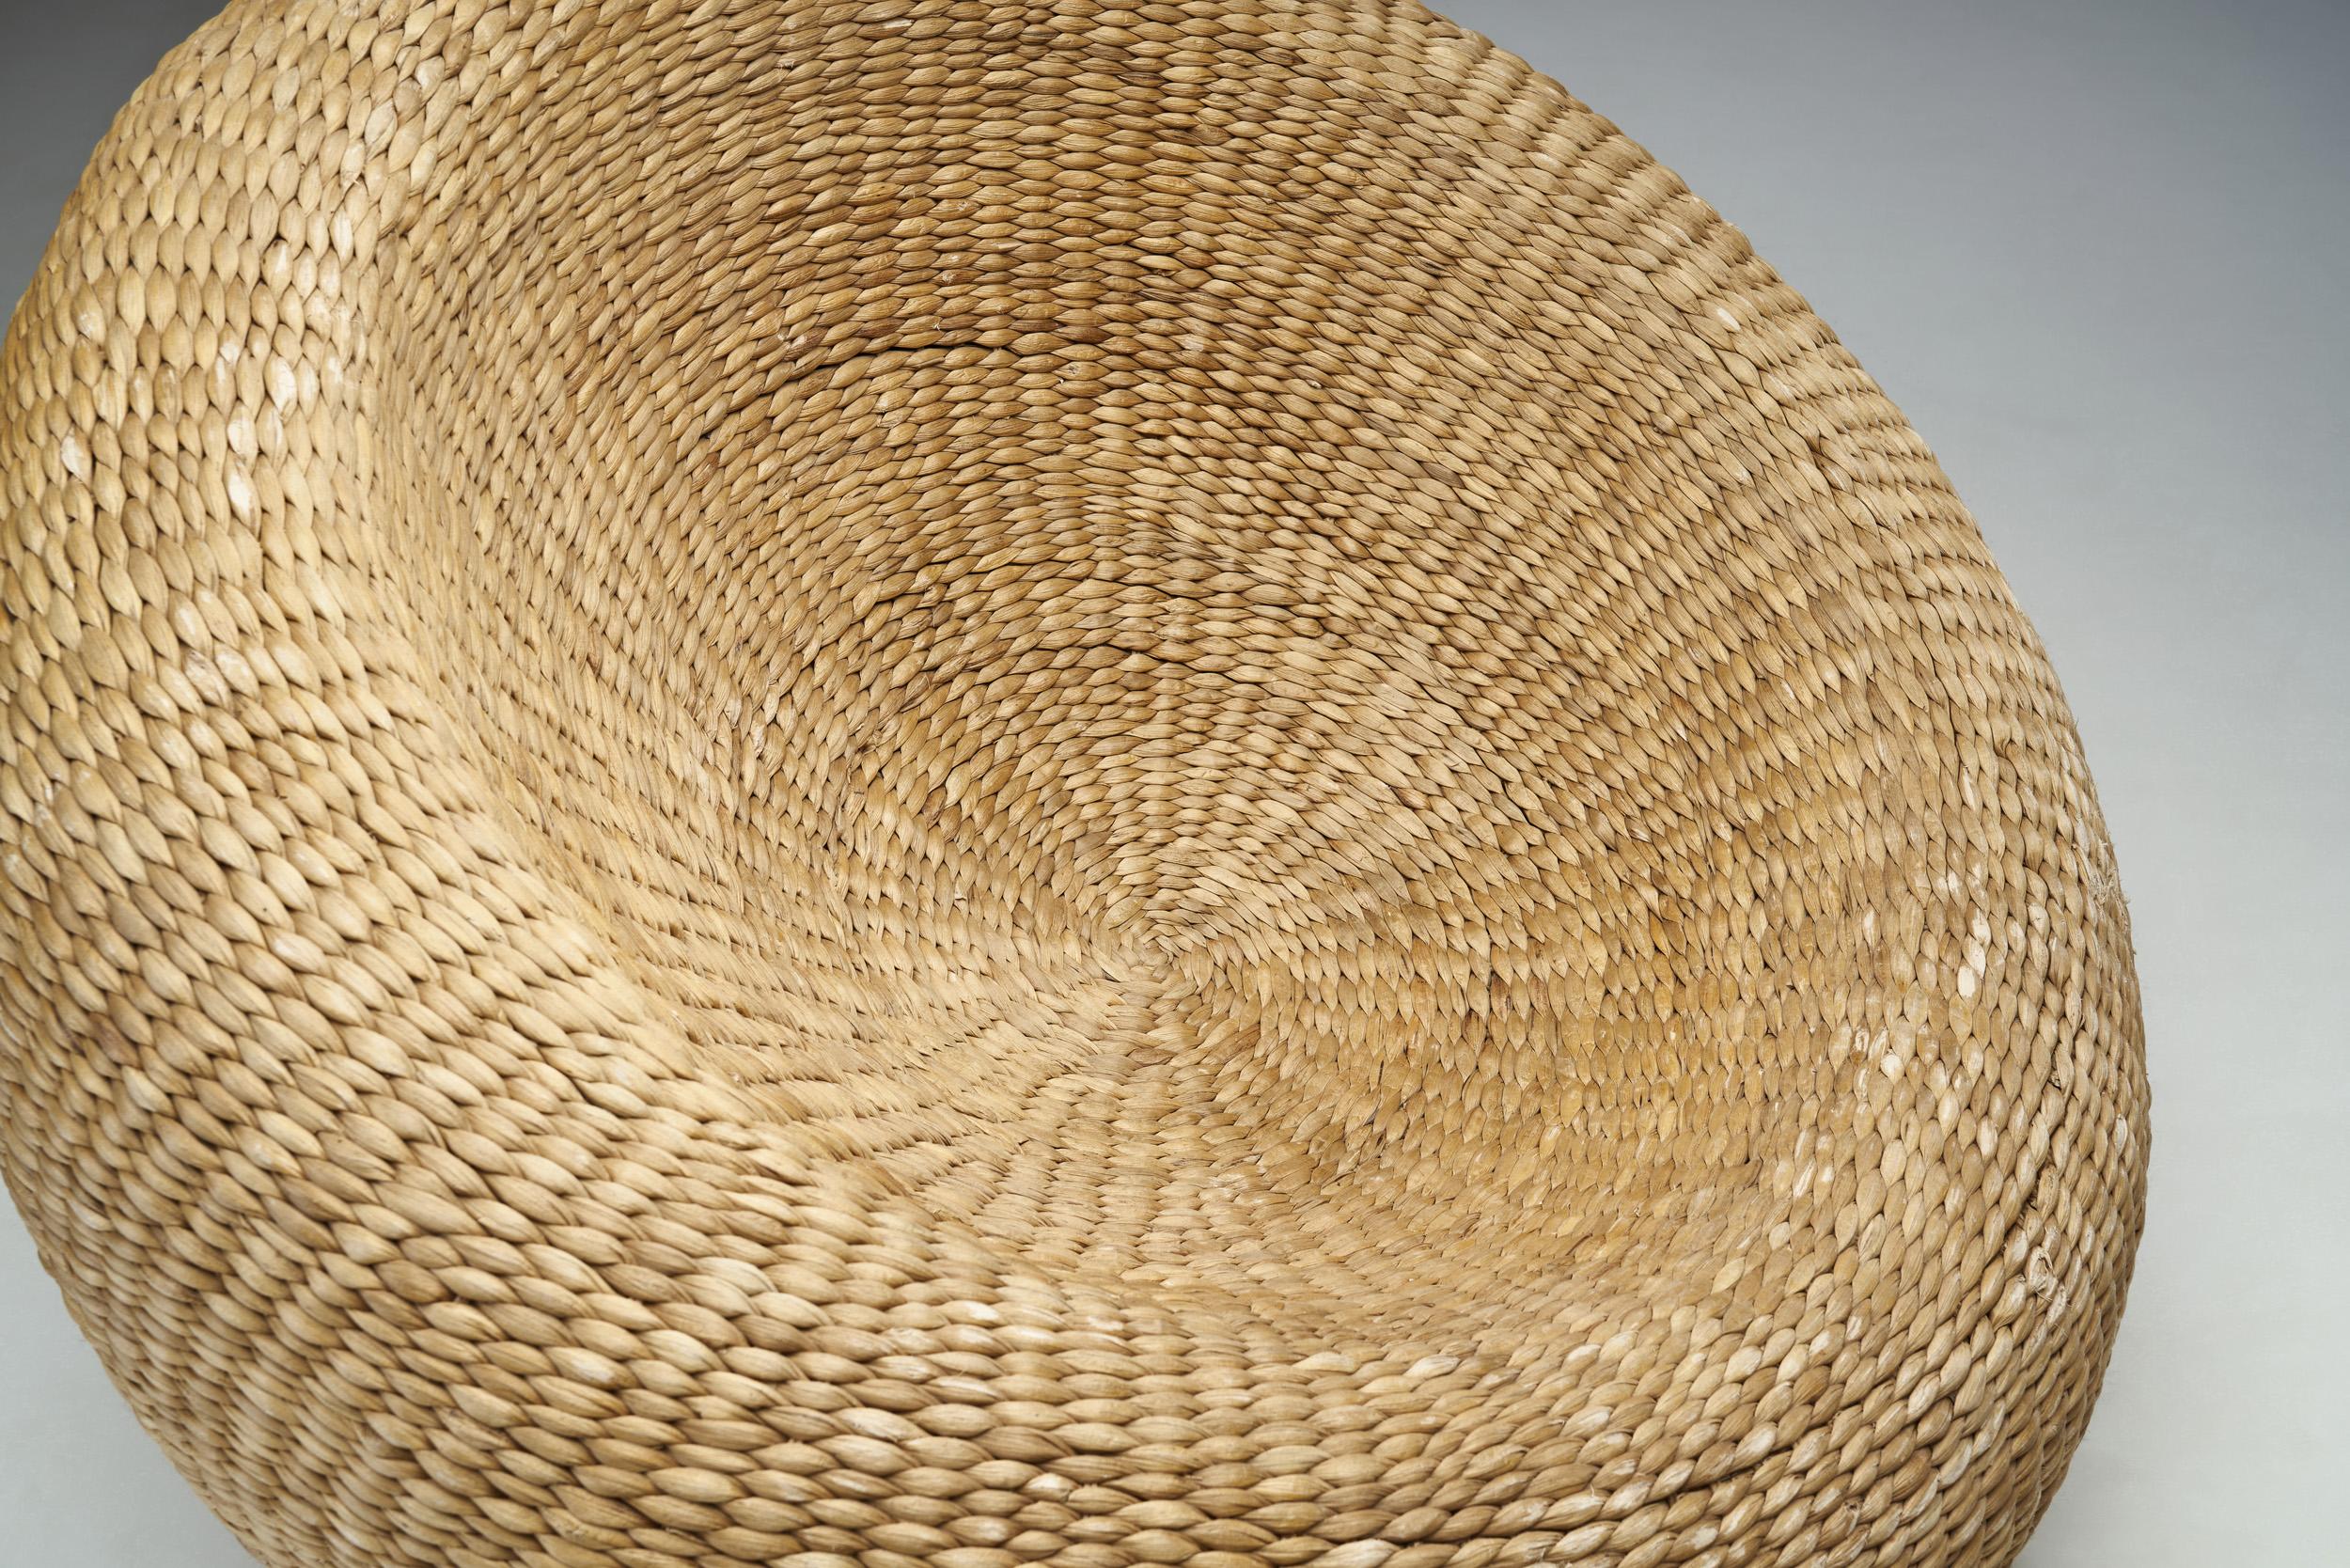 Woven Wicker Bird's Nest Chair in the Manner of Isamu Kenmochi, Europe, ca 1960s For Sale 3